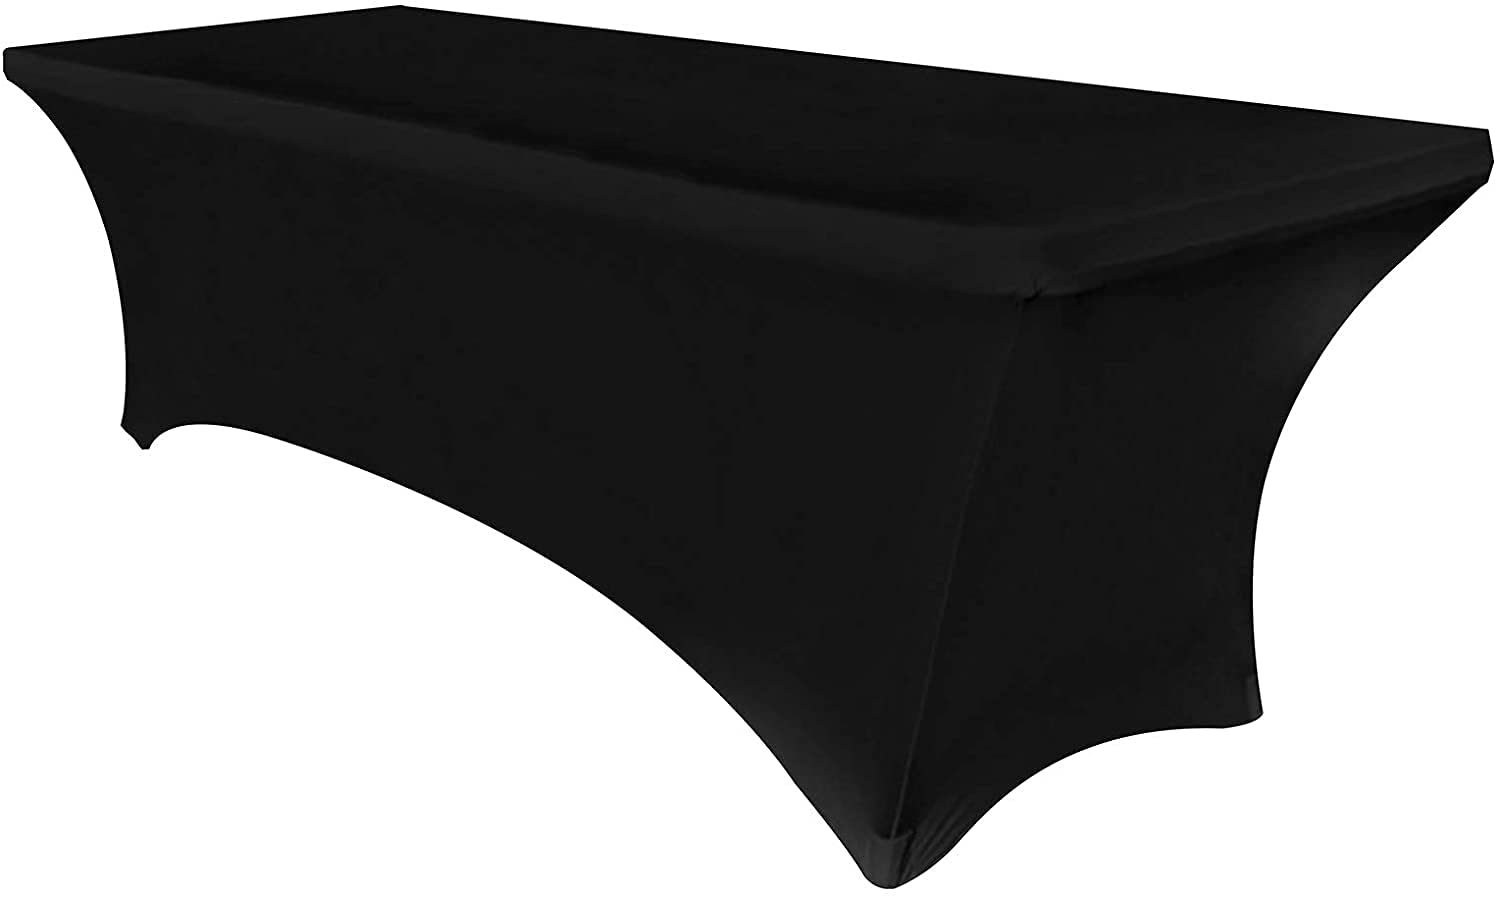 Obstal 5ft Stretch Spandex Table Cover for Standard Folding Tables - Universal Rectangular Fitted Tablecloth Protector for Wedding, Banquet and Party